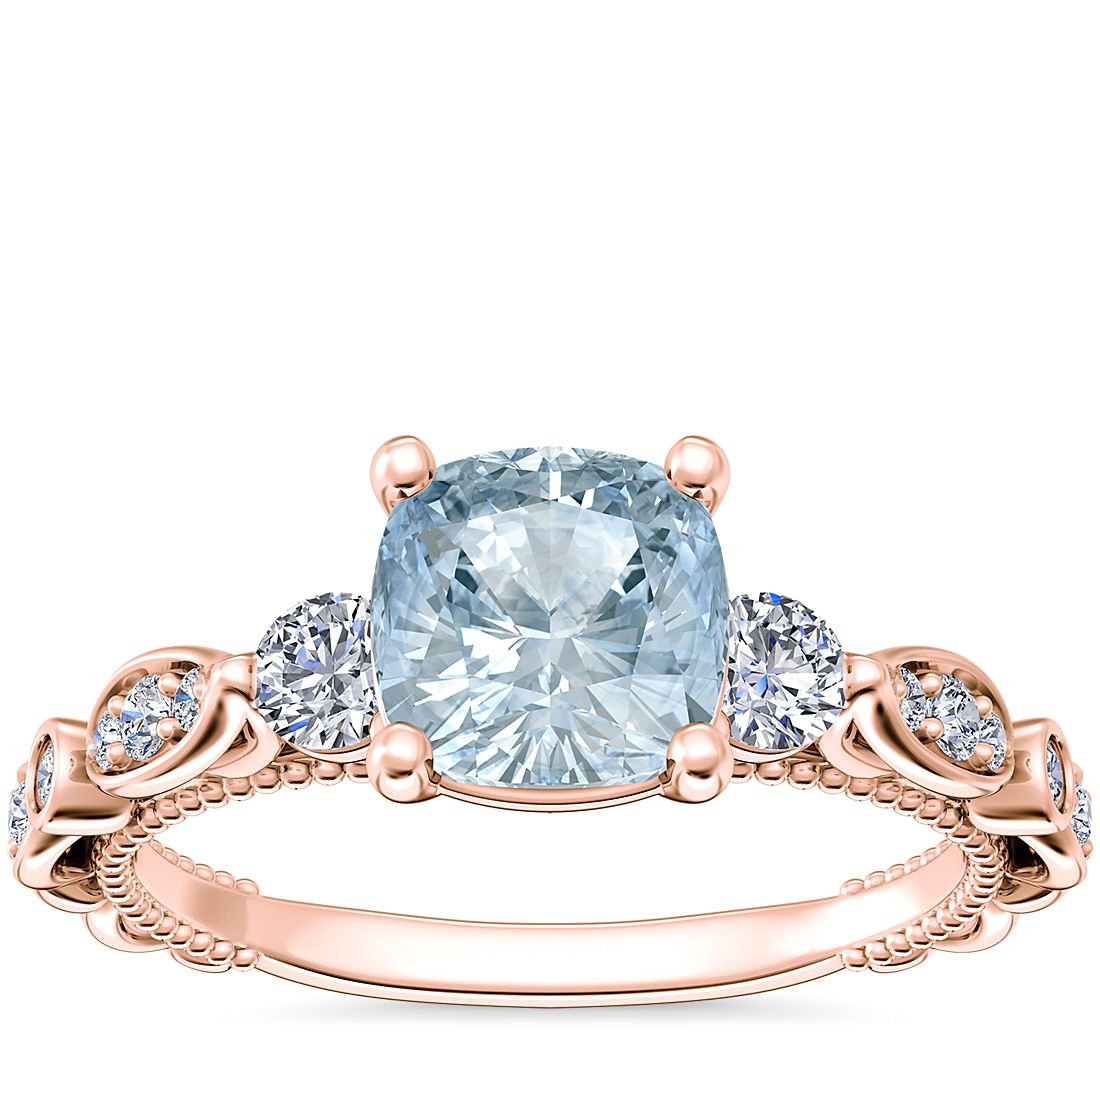 Floral Ellipse Diamond Cathedral Engagement Ring with Cushion Aquamarine in 14k Rose Gold (6.5mm)